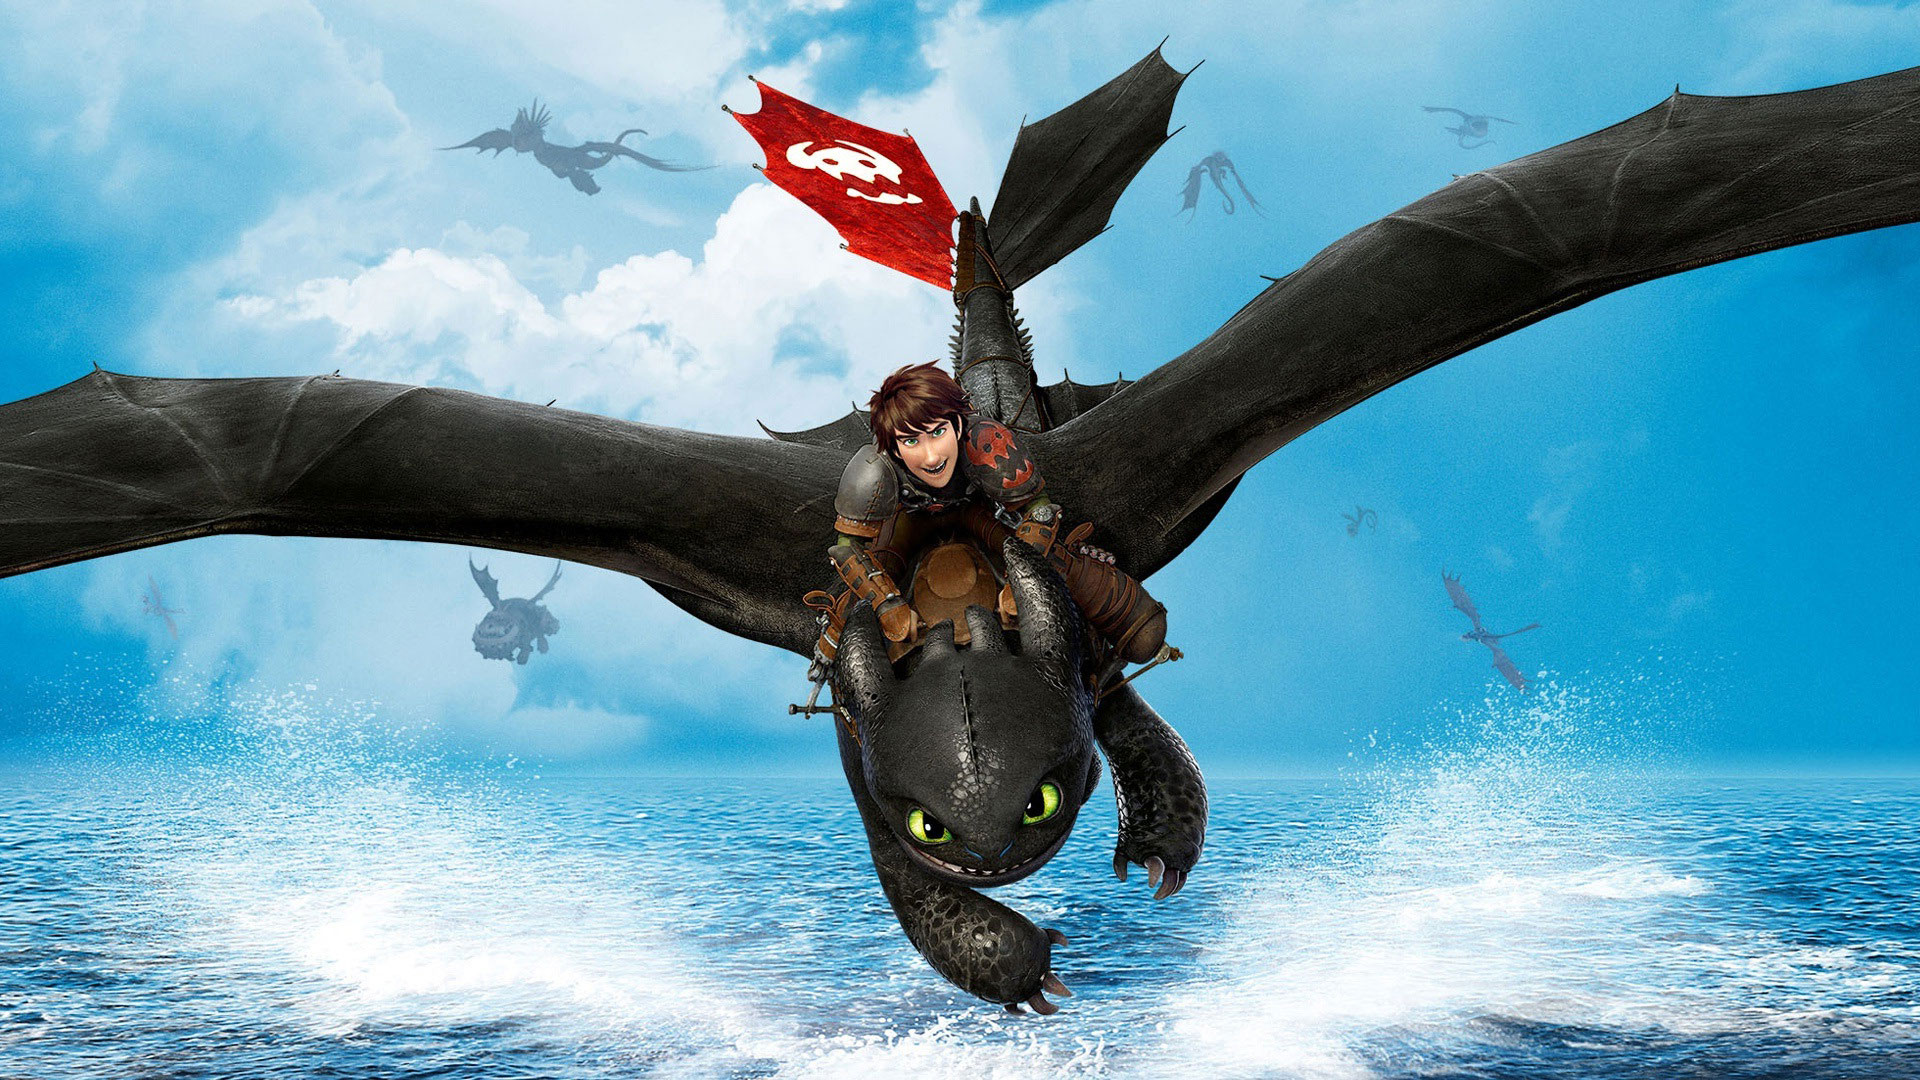 Fury Edits School Of Dragons How To Train Your Dragon Games